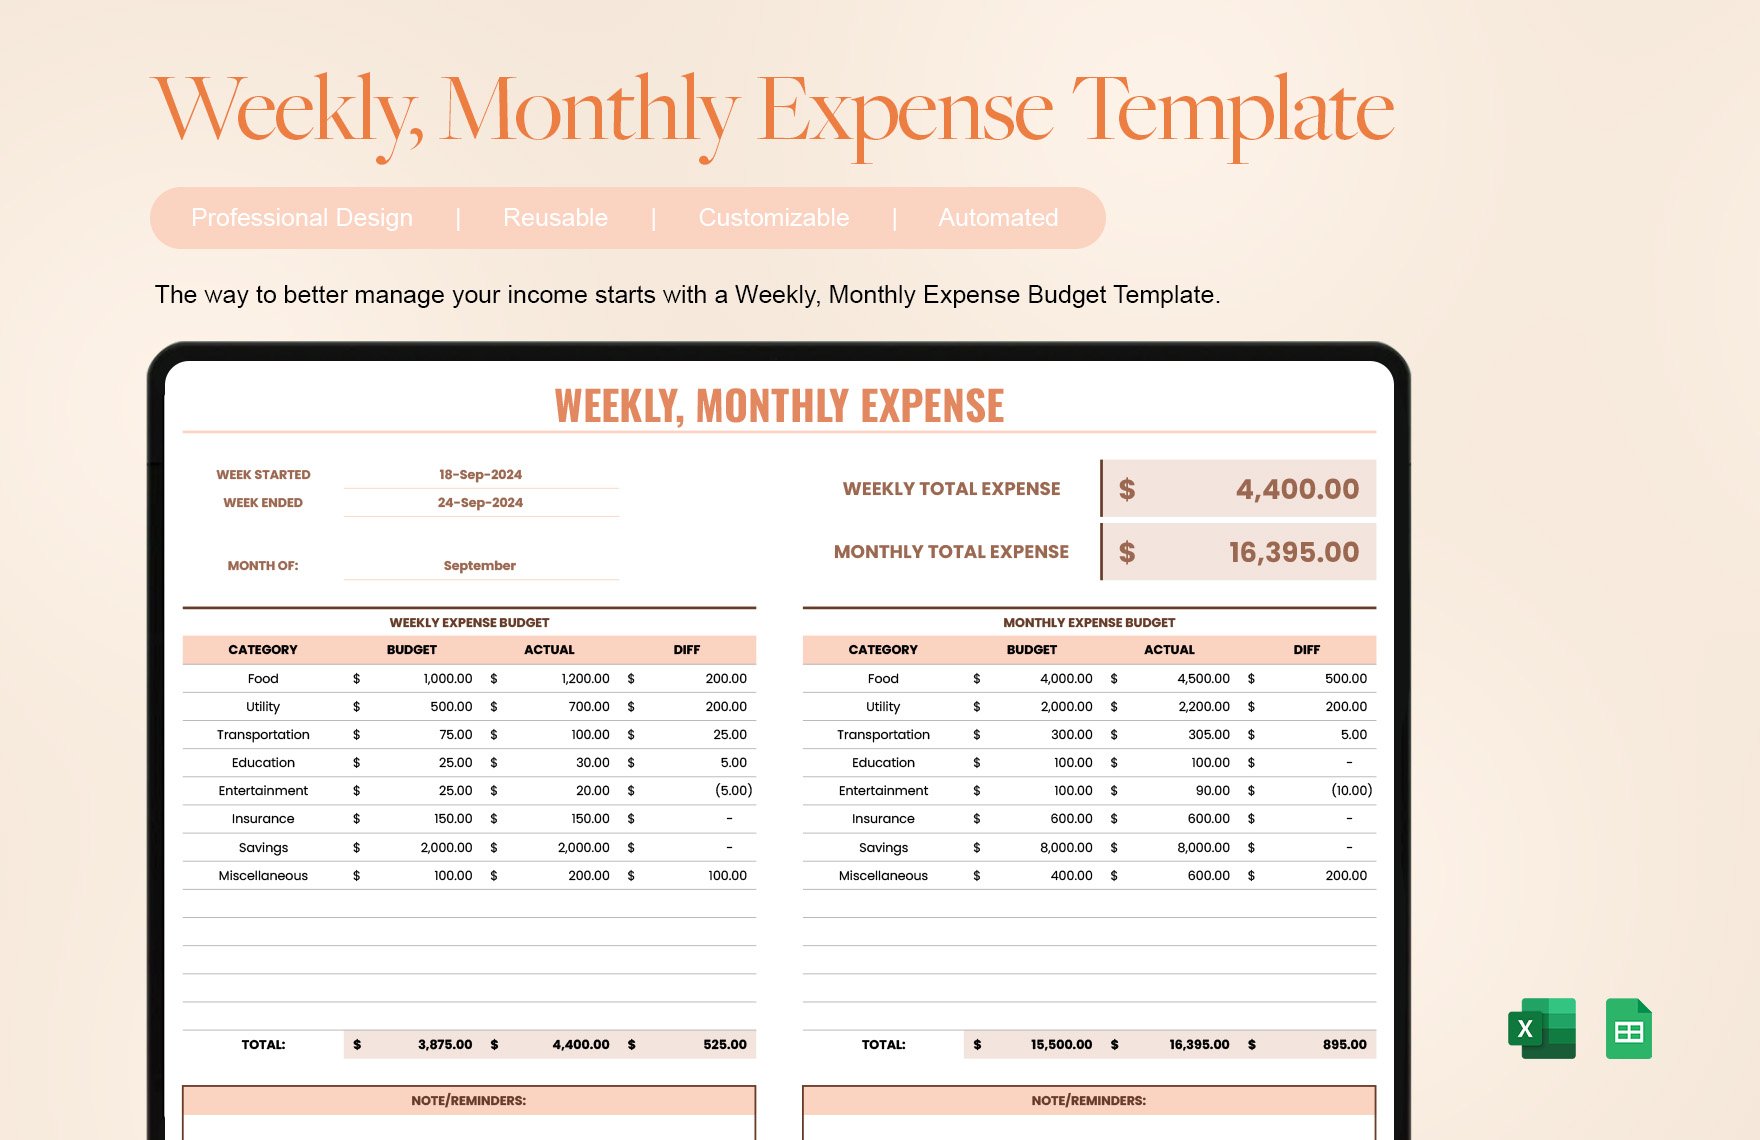 Free Weekly, Monthly Expense Template in Excel, Google Sheets